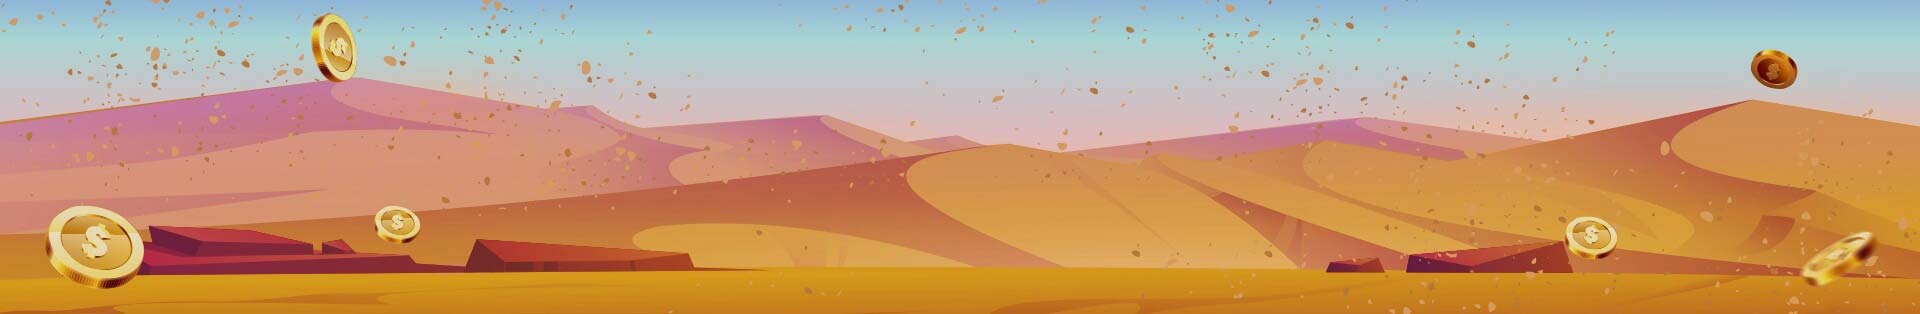 A stylized desert landscape with flying golden coins and warm hues